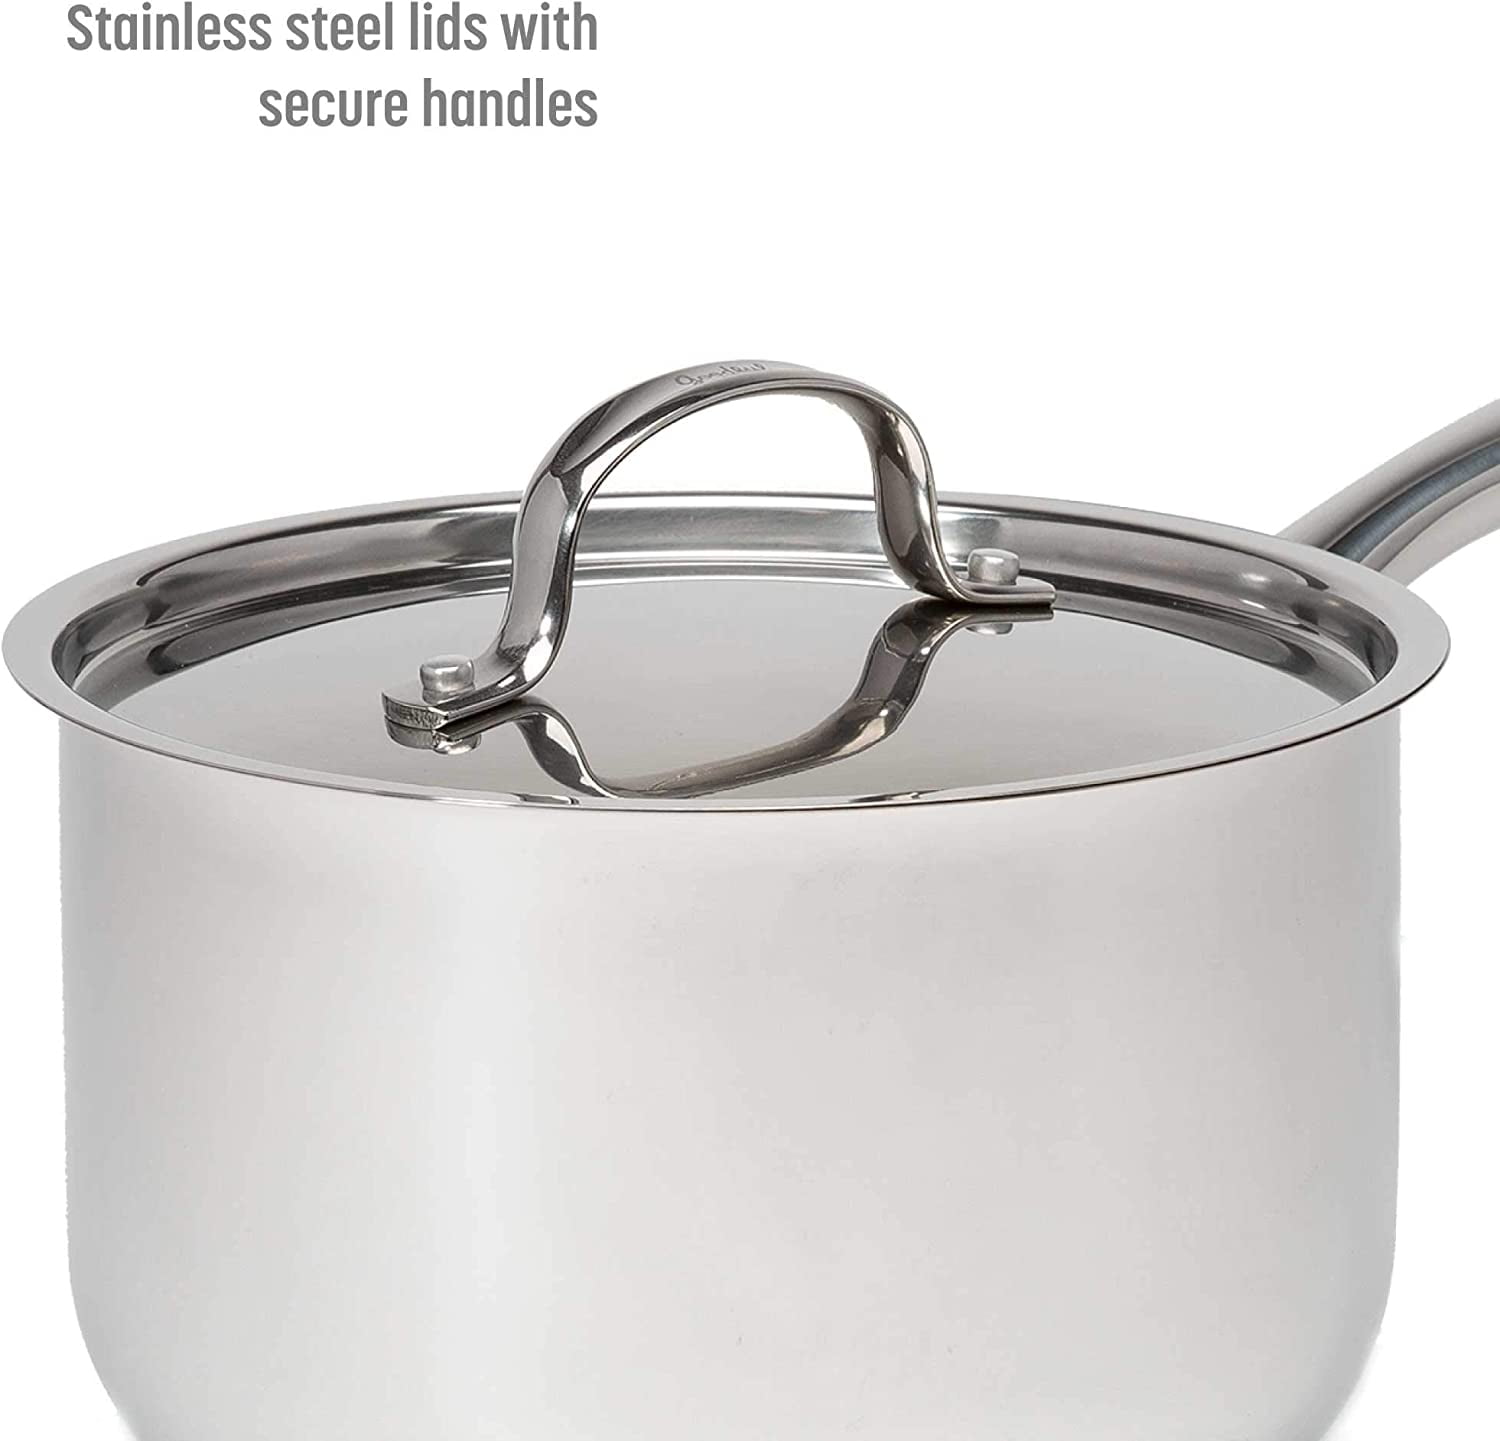 Goodful - Cozy up in the kitchen with Goodful's 10-Piece Cookware